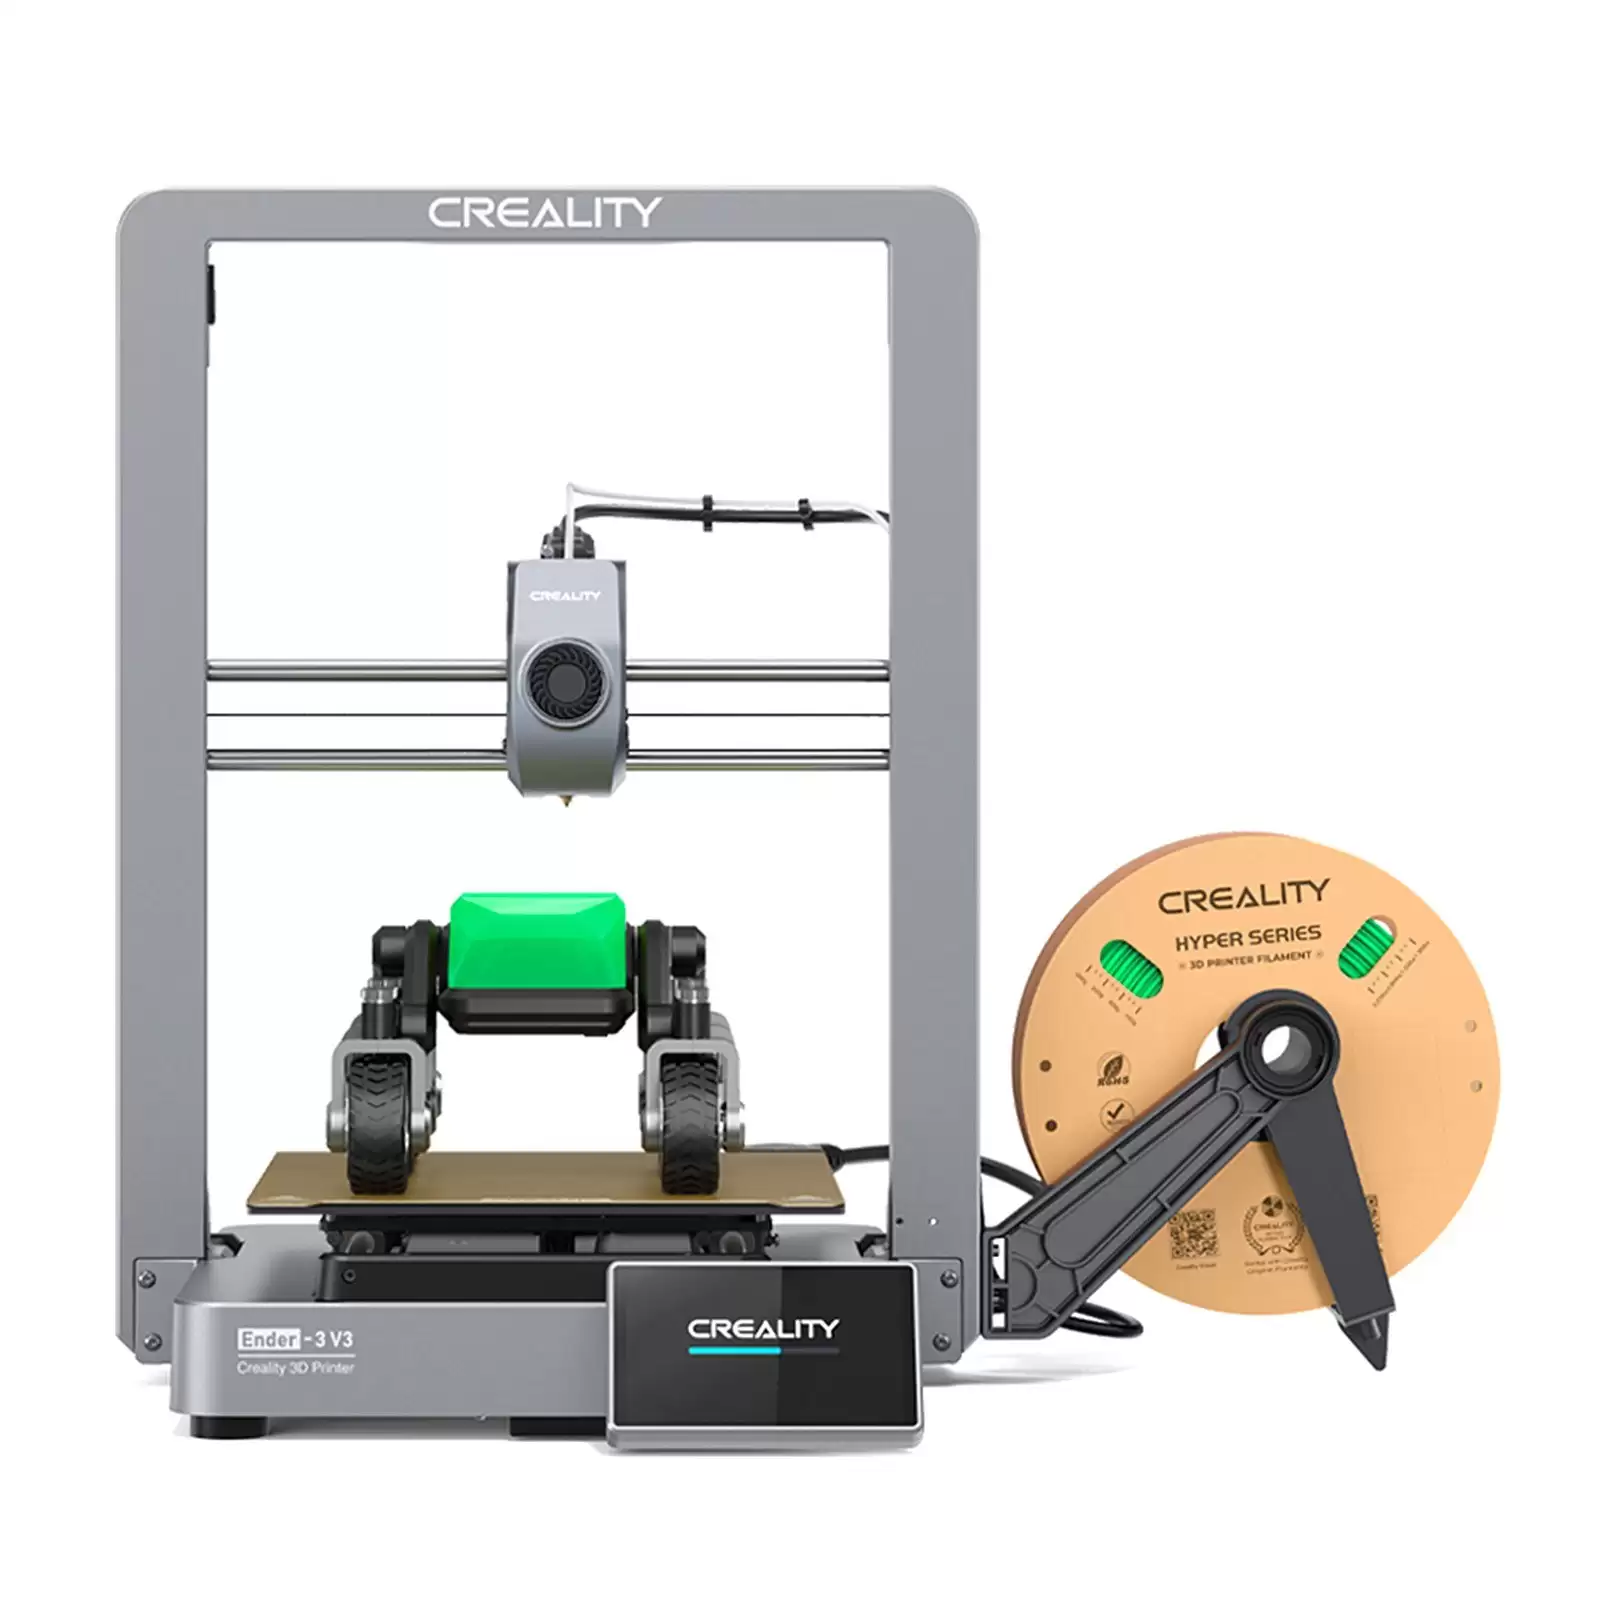 Order In Just $348 Creality Ender-3 V3 3d Printer Auto-Leveling 600mm/S Max Printing Speed With This Tomtop Discount Voucher